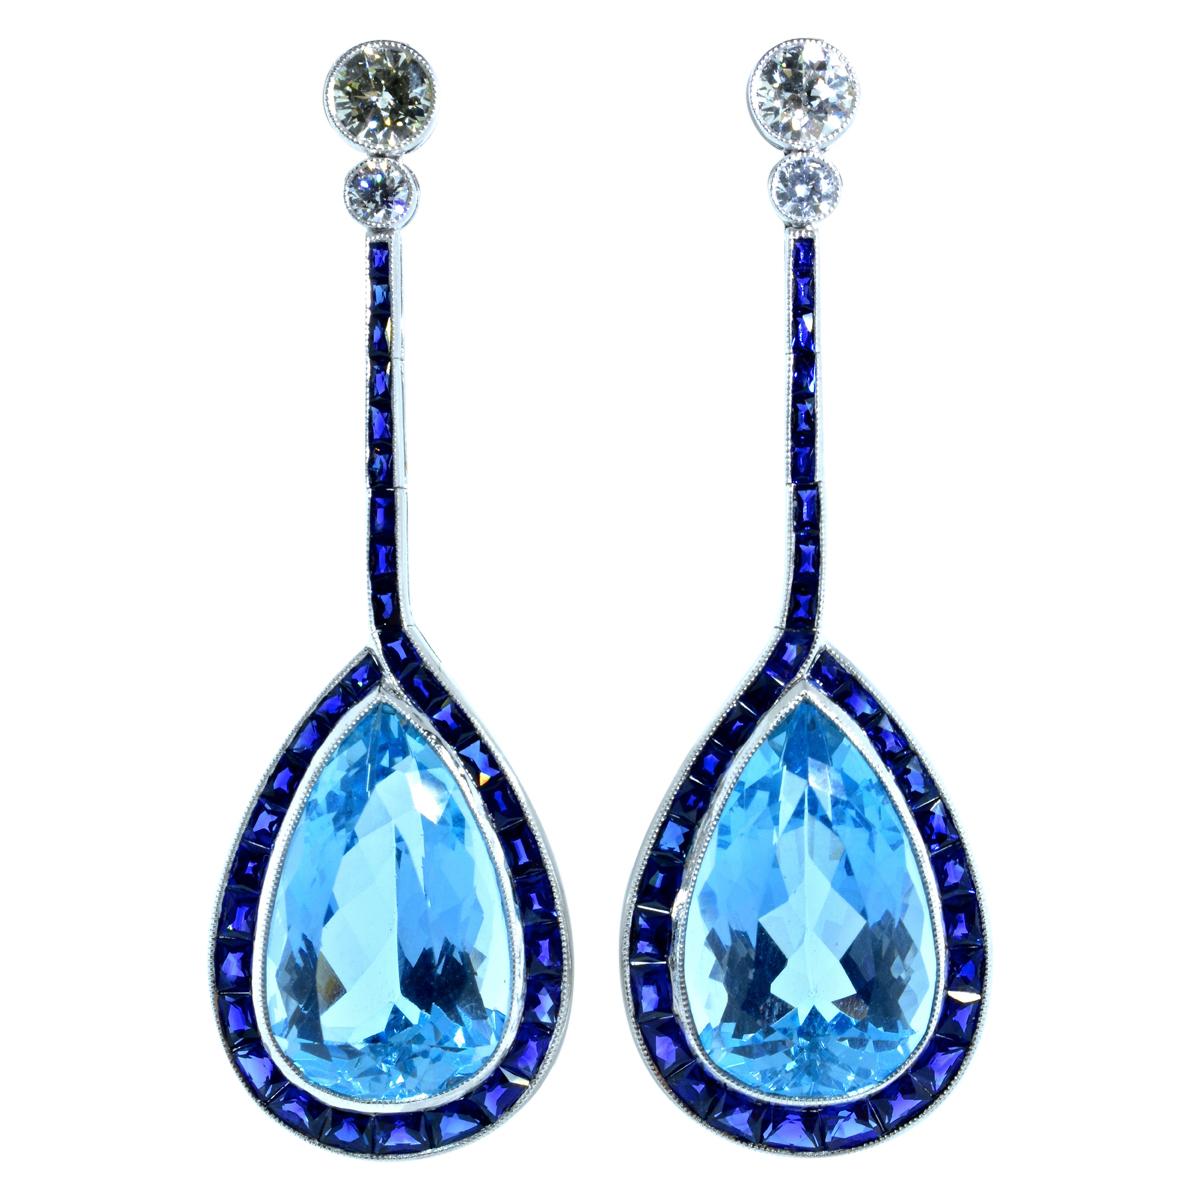 Aquamarine, Sapphire, Diamond and Platinum Earrings by Pierre/Famille